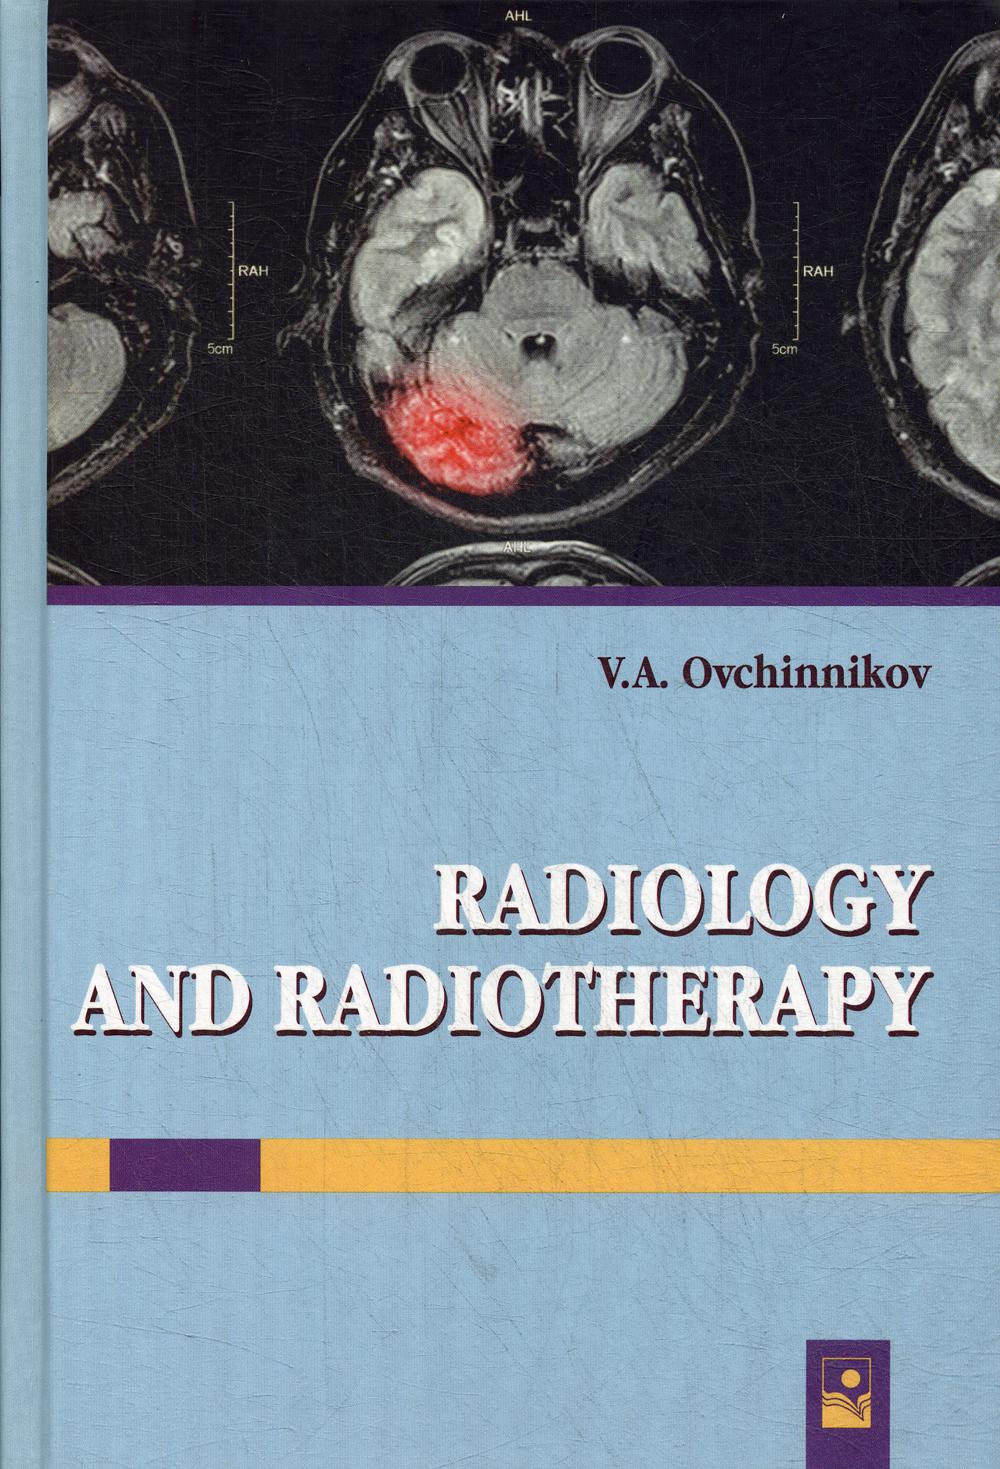      = Radiology and radiotherapy:          